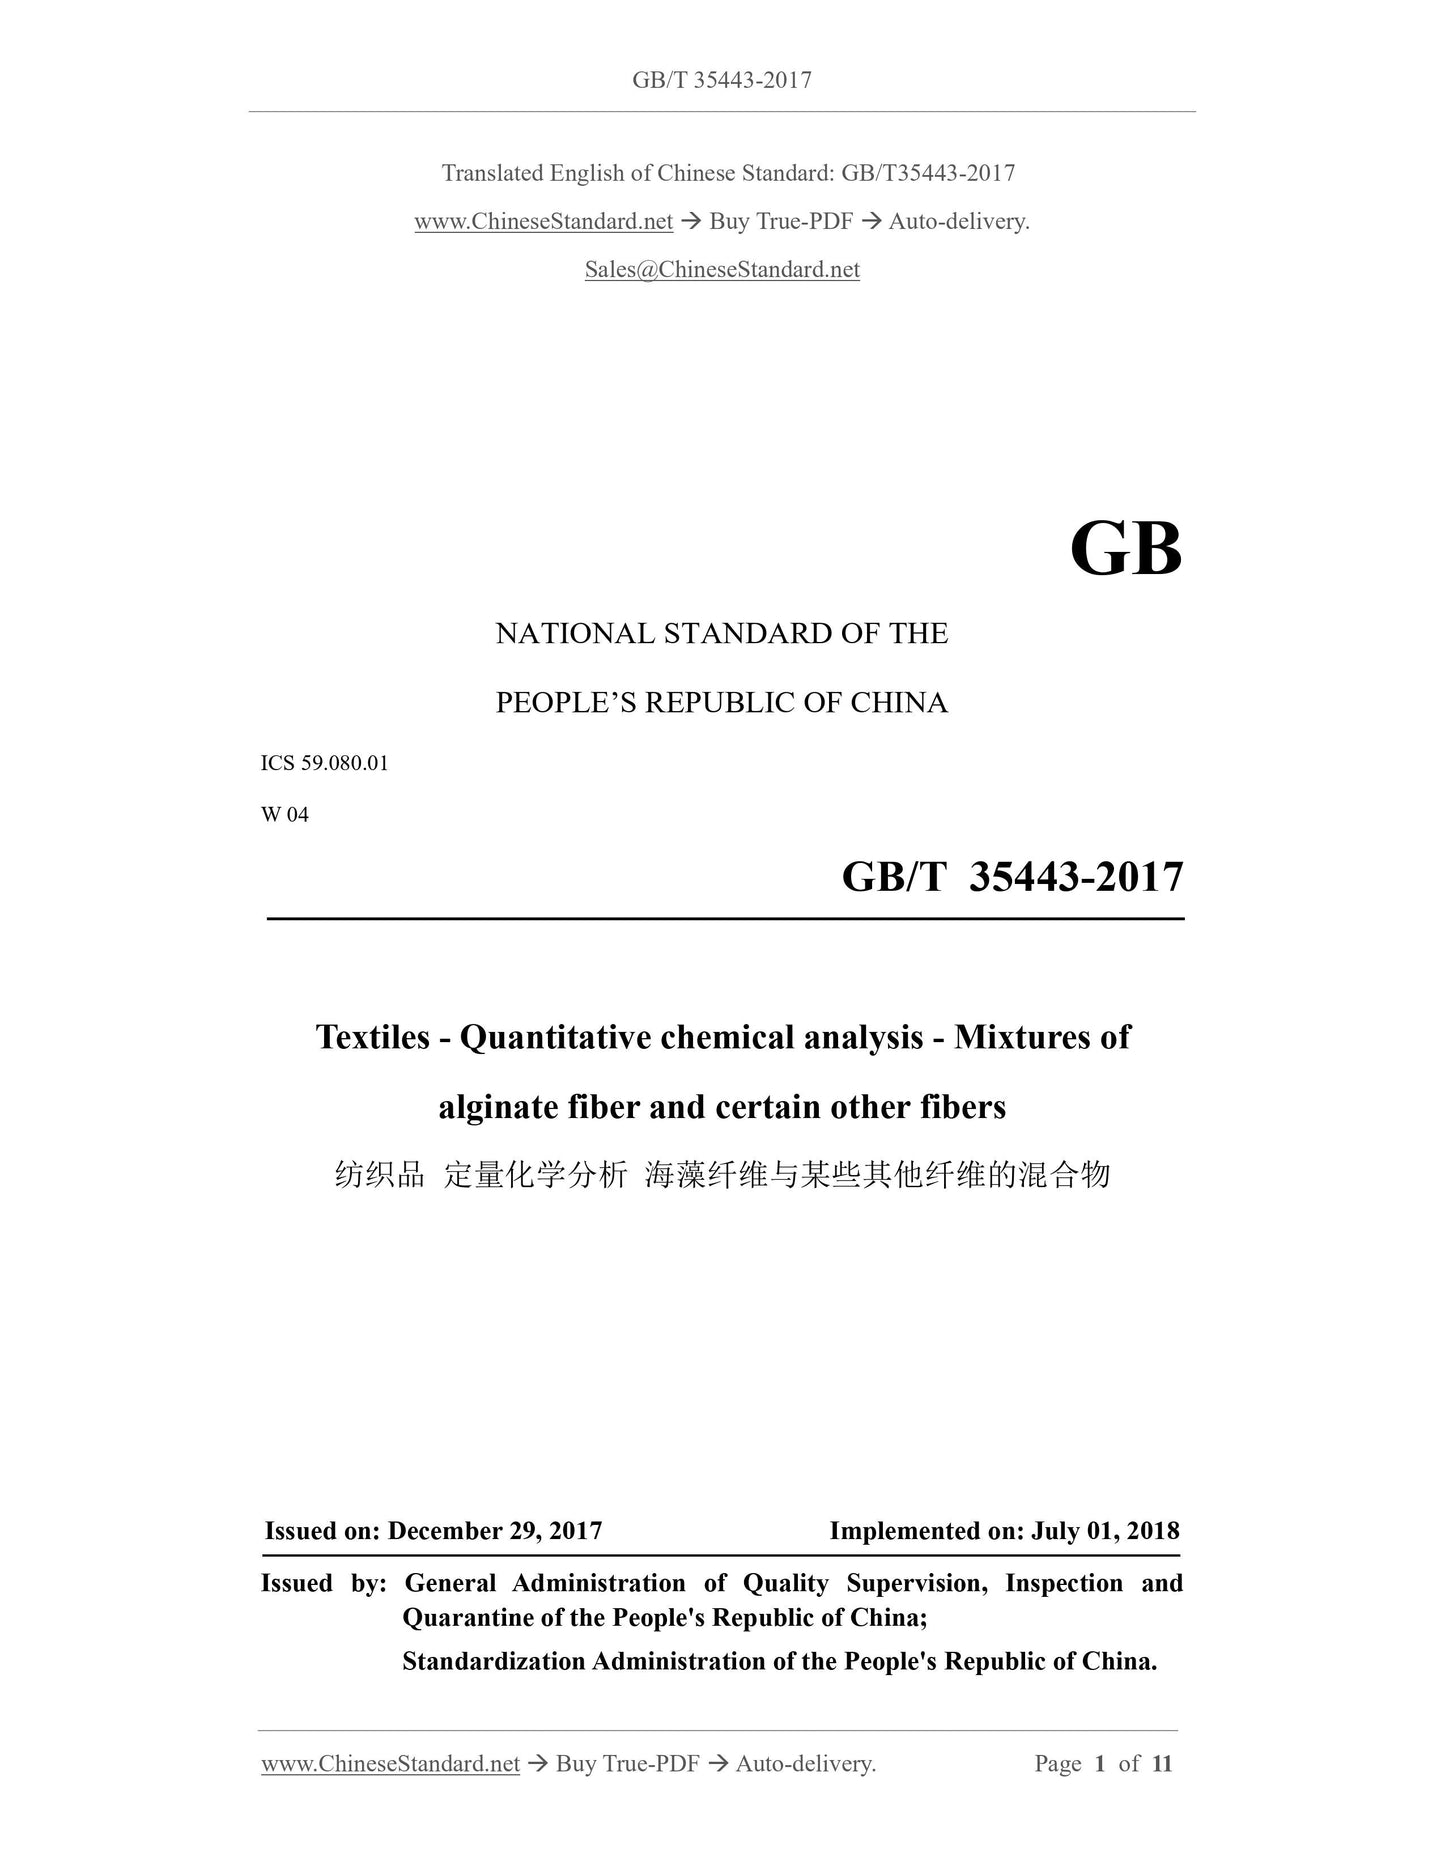 GB/T 35443-2017 Page 1